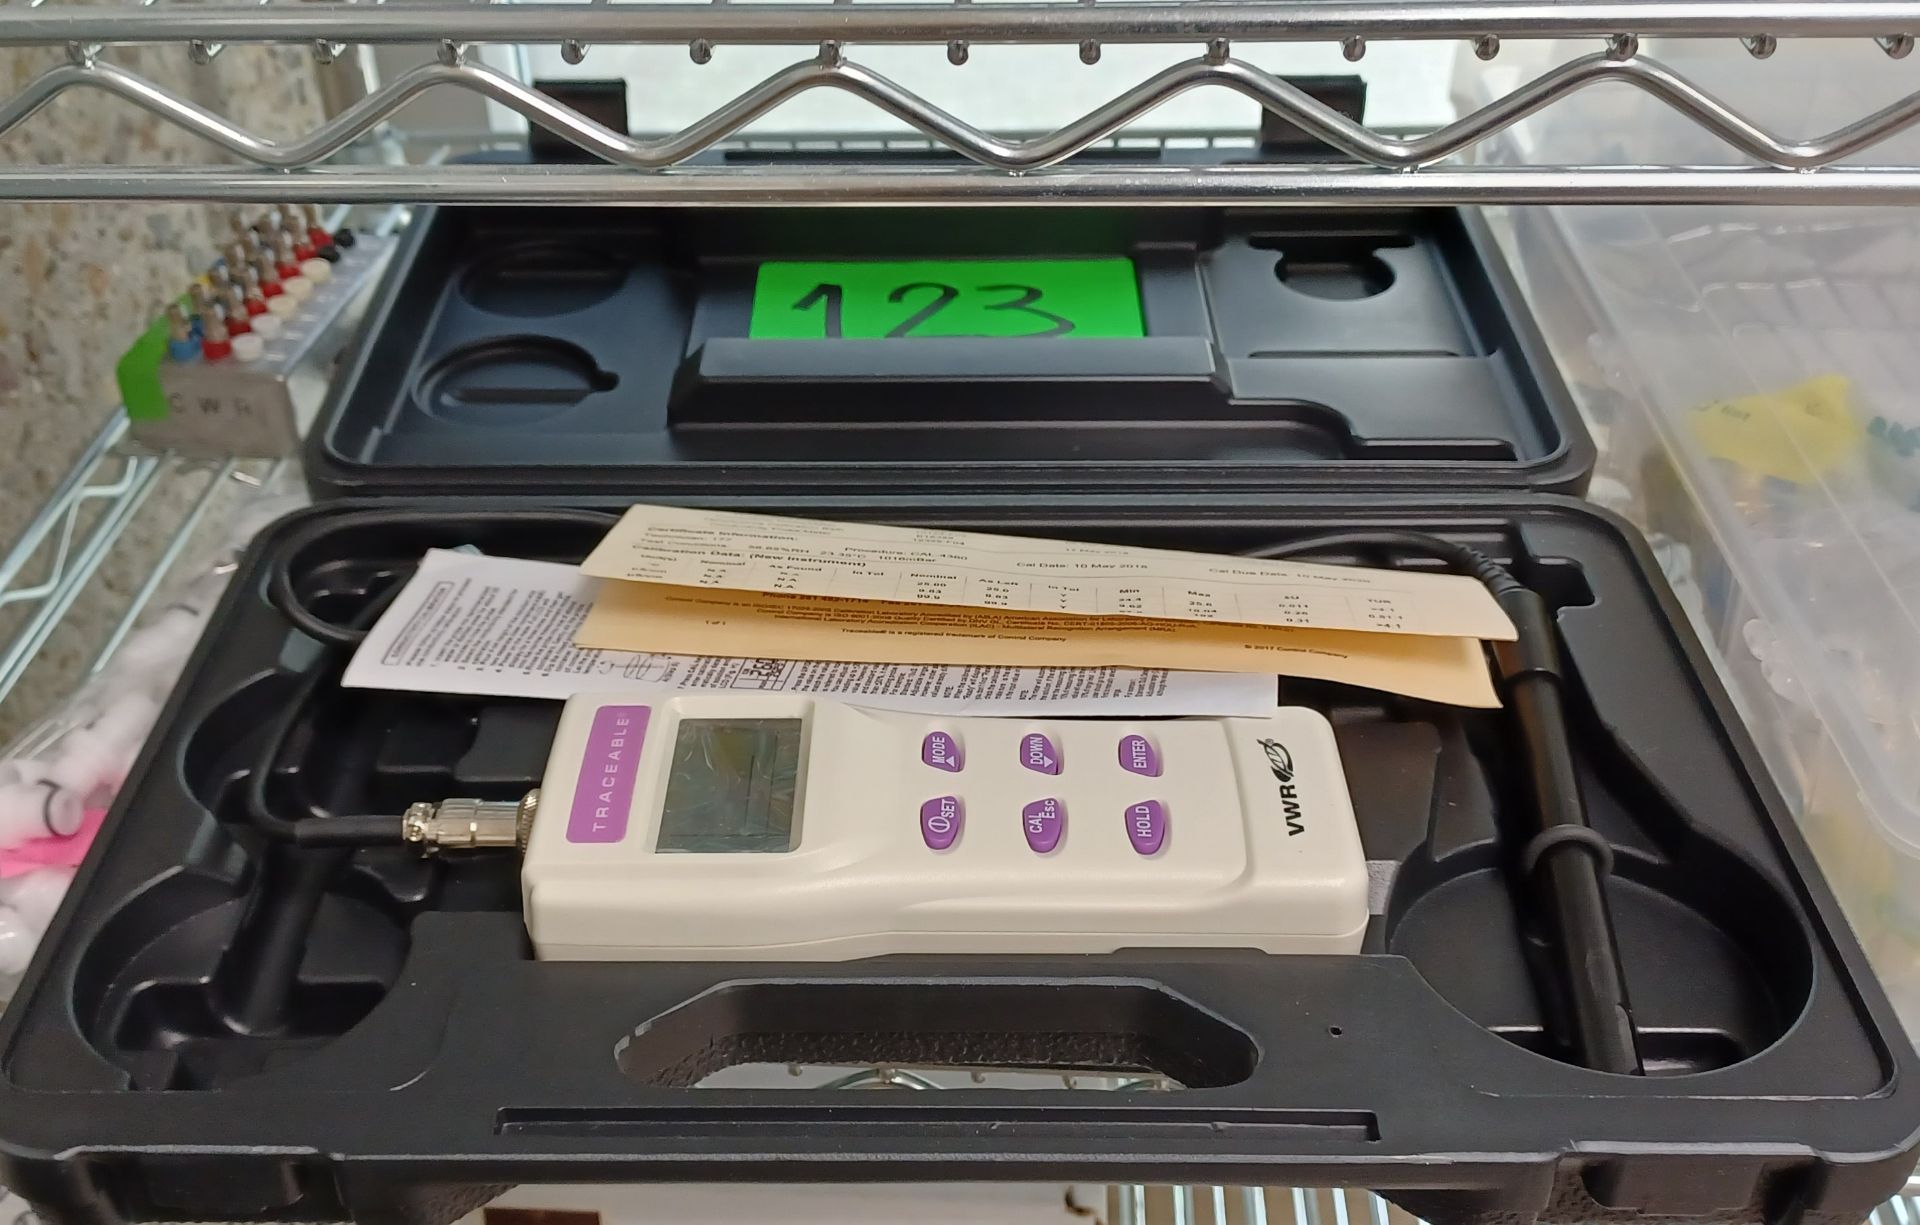 VWR 89094-958 TRACEABLE EXPANDED RANGE CONDUCTIVITY METER - Image 2 of 3